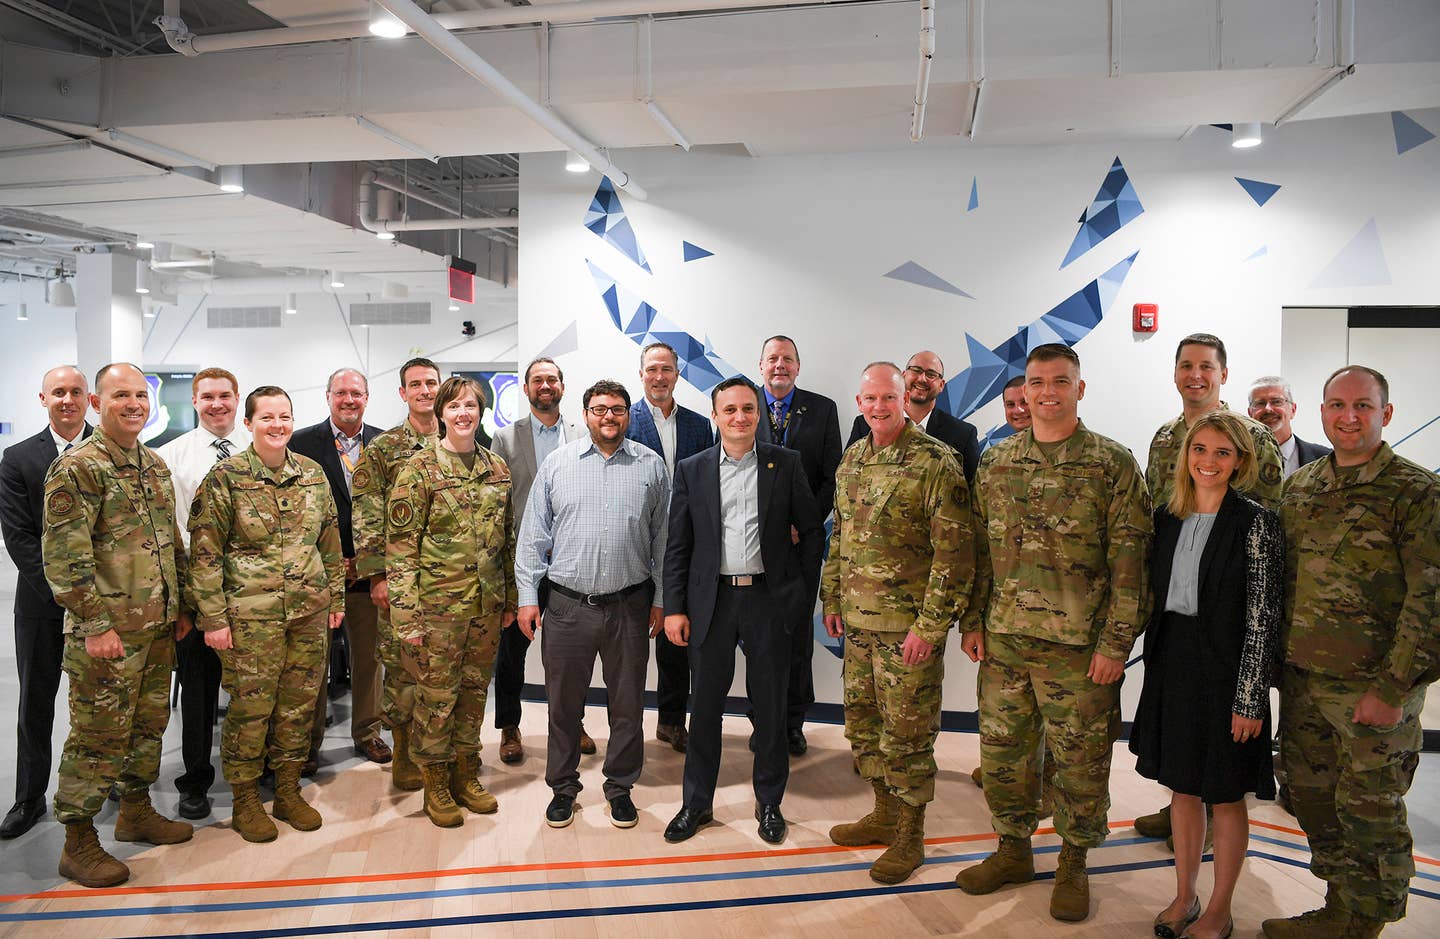 Nicolas Chaillan, center, the then Air Force chief software officer, poses for a group photo during a visit to the Hanscom Air Force Base, Massachussetts. <em>U.S. Air Force photo by Lauren Russell</em>